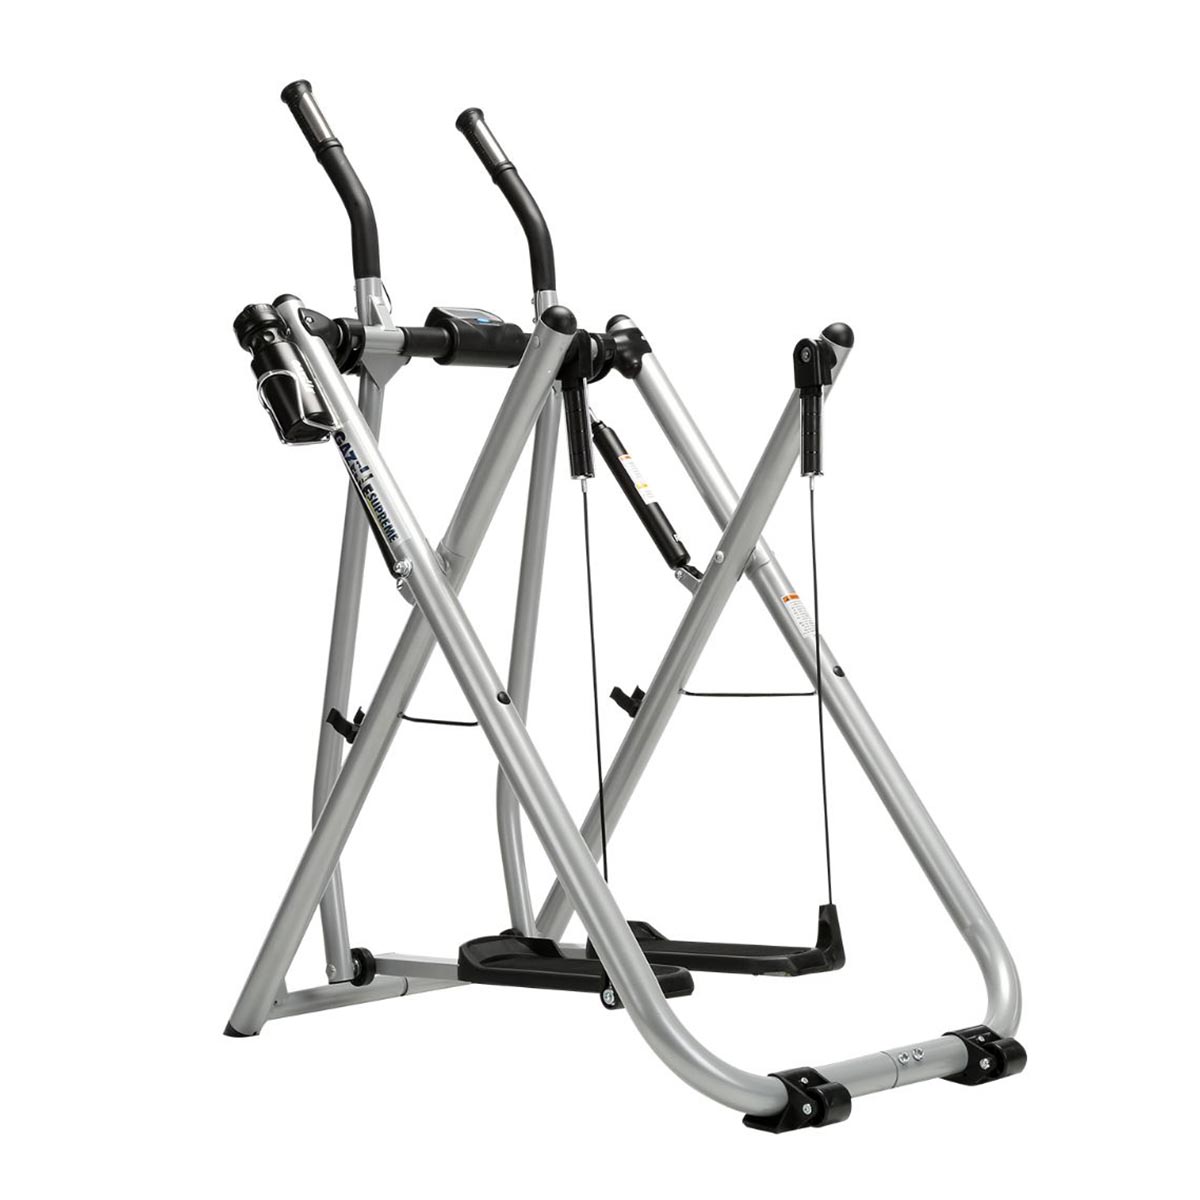 Gazelle Supreme Glider Home Workout & Fitness Machine with Instructional DVD - image 1 of 10